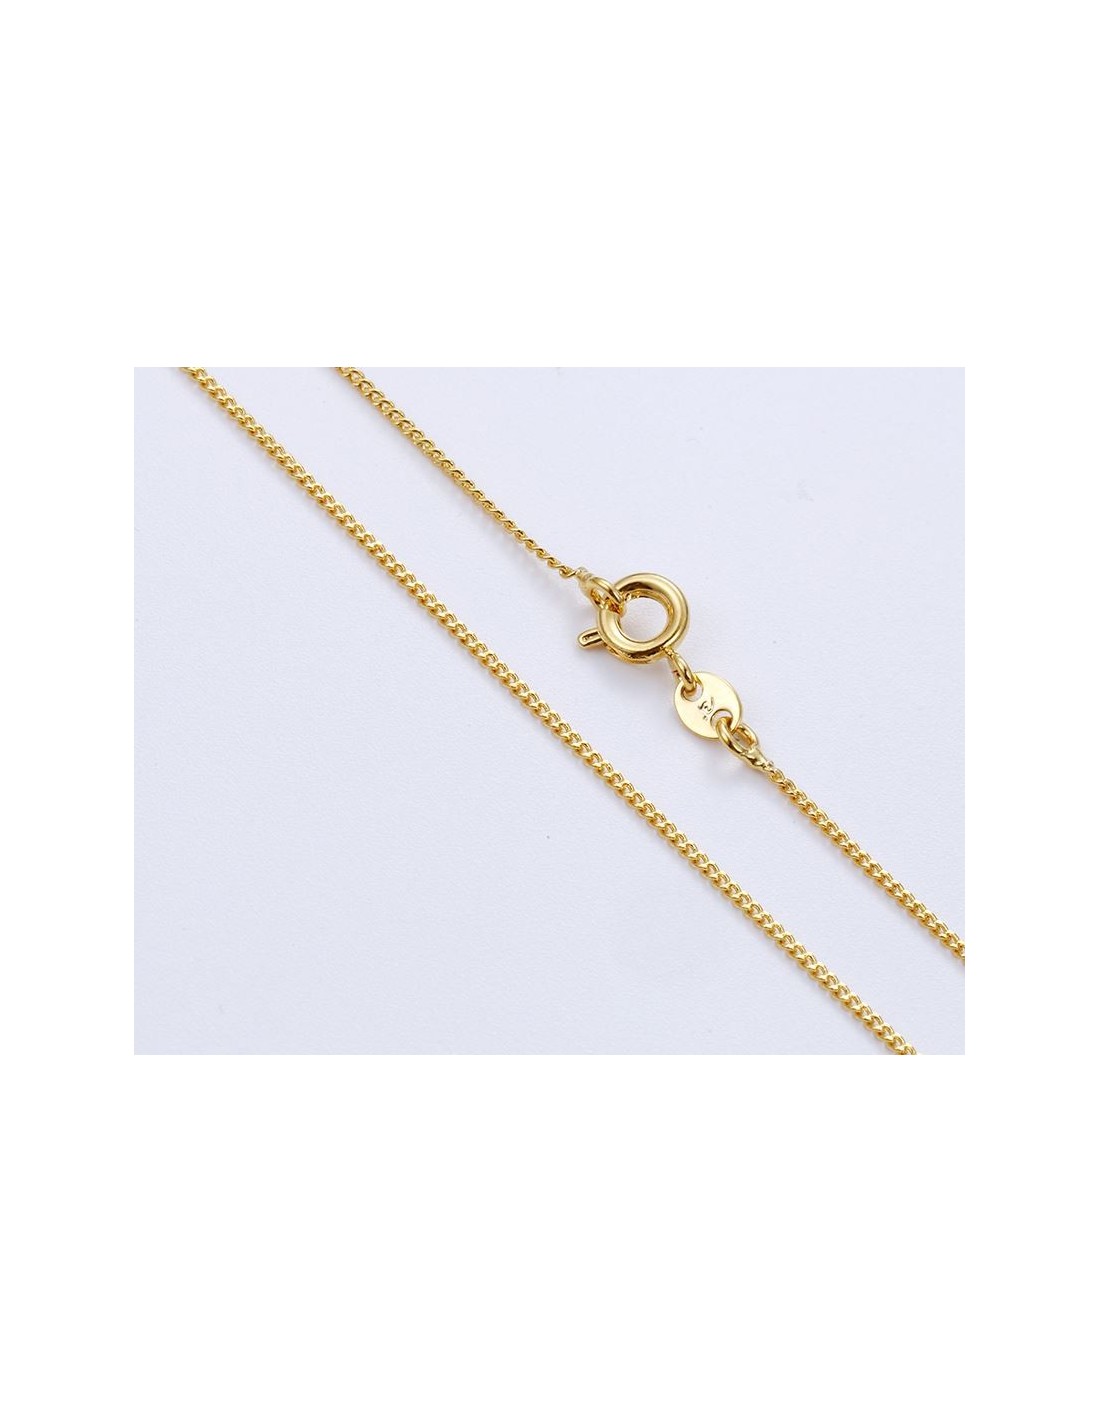 Men Women 24K Yellow Gold Plated 45cm Quality Rod Chain Necklace Spring Clasp 